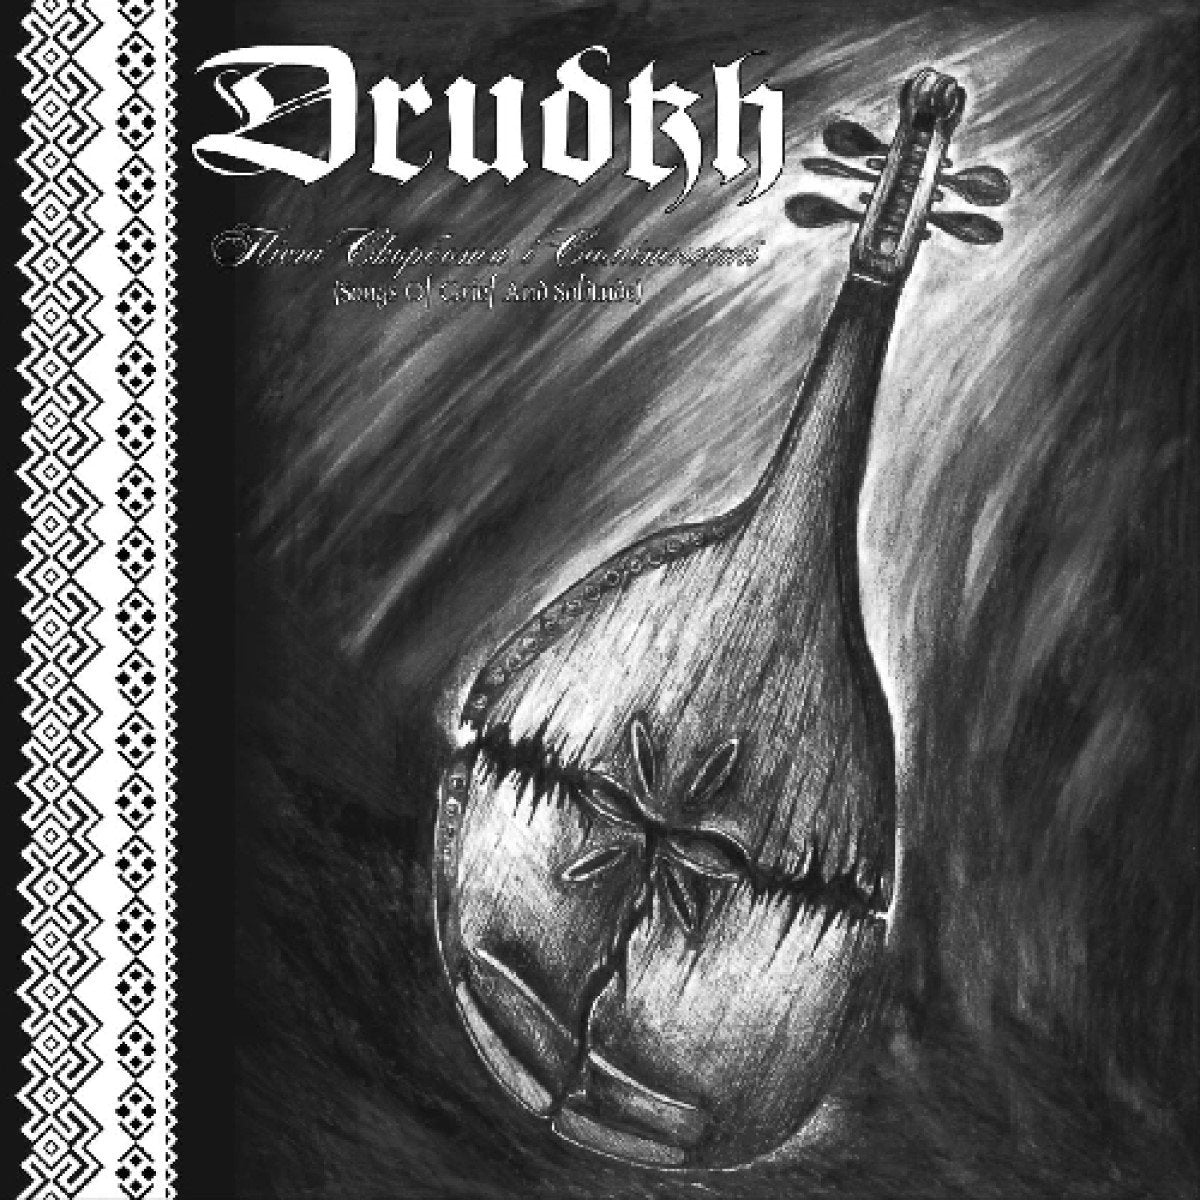 DRUDKH - SONGS OF GRIEF AND SOLITUDE